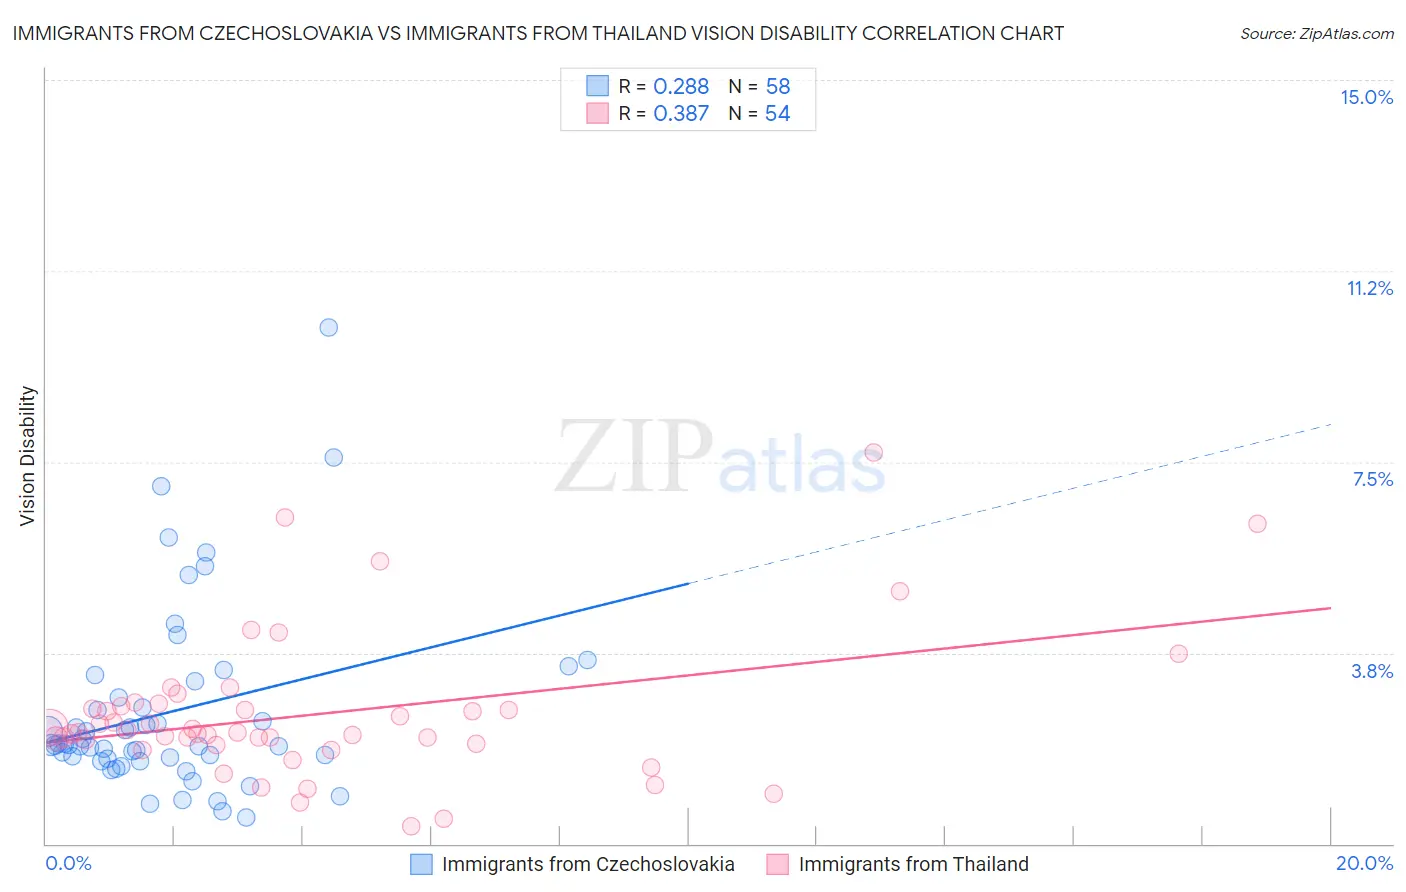 Immigrants from Czechoslovakia vs Immigrants from Thailand Vision Disability